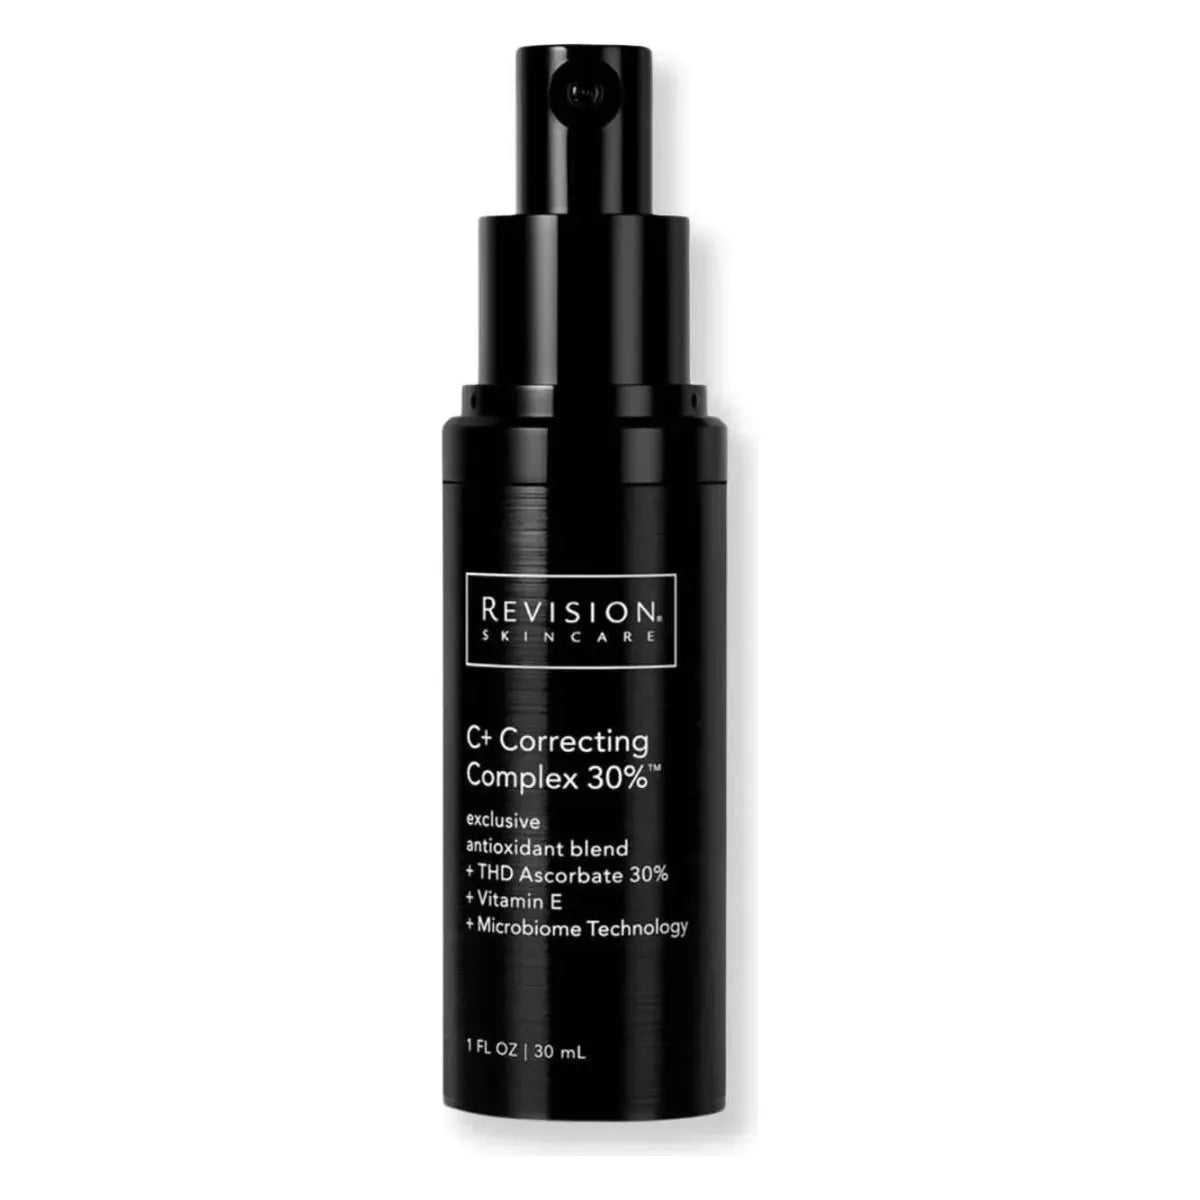 Revision C+ Correcting Complex 30% - 30ml - Glam Global UK